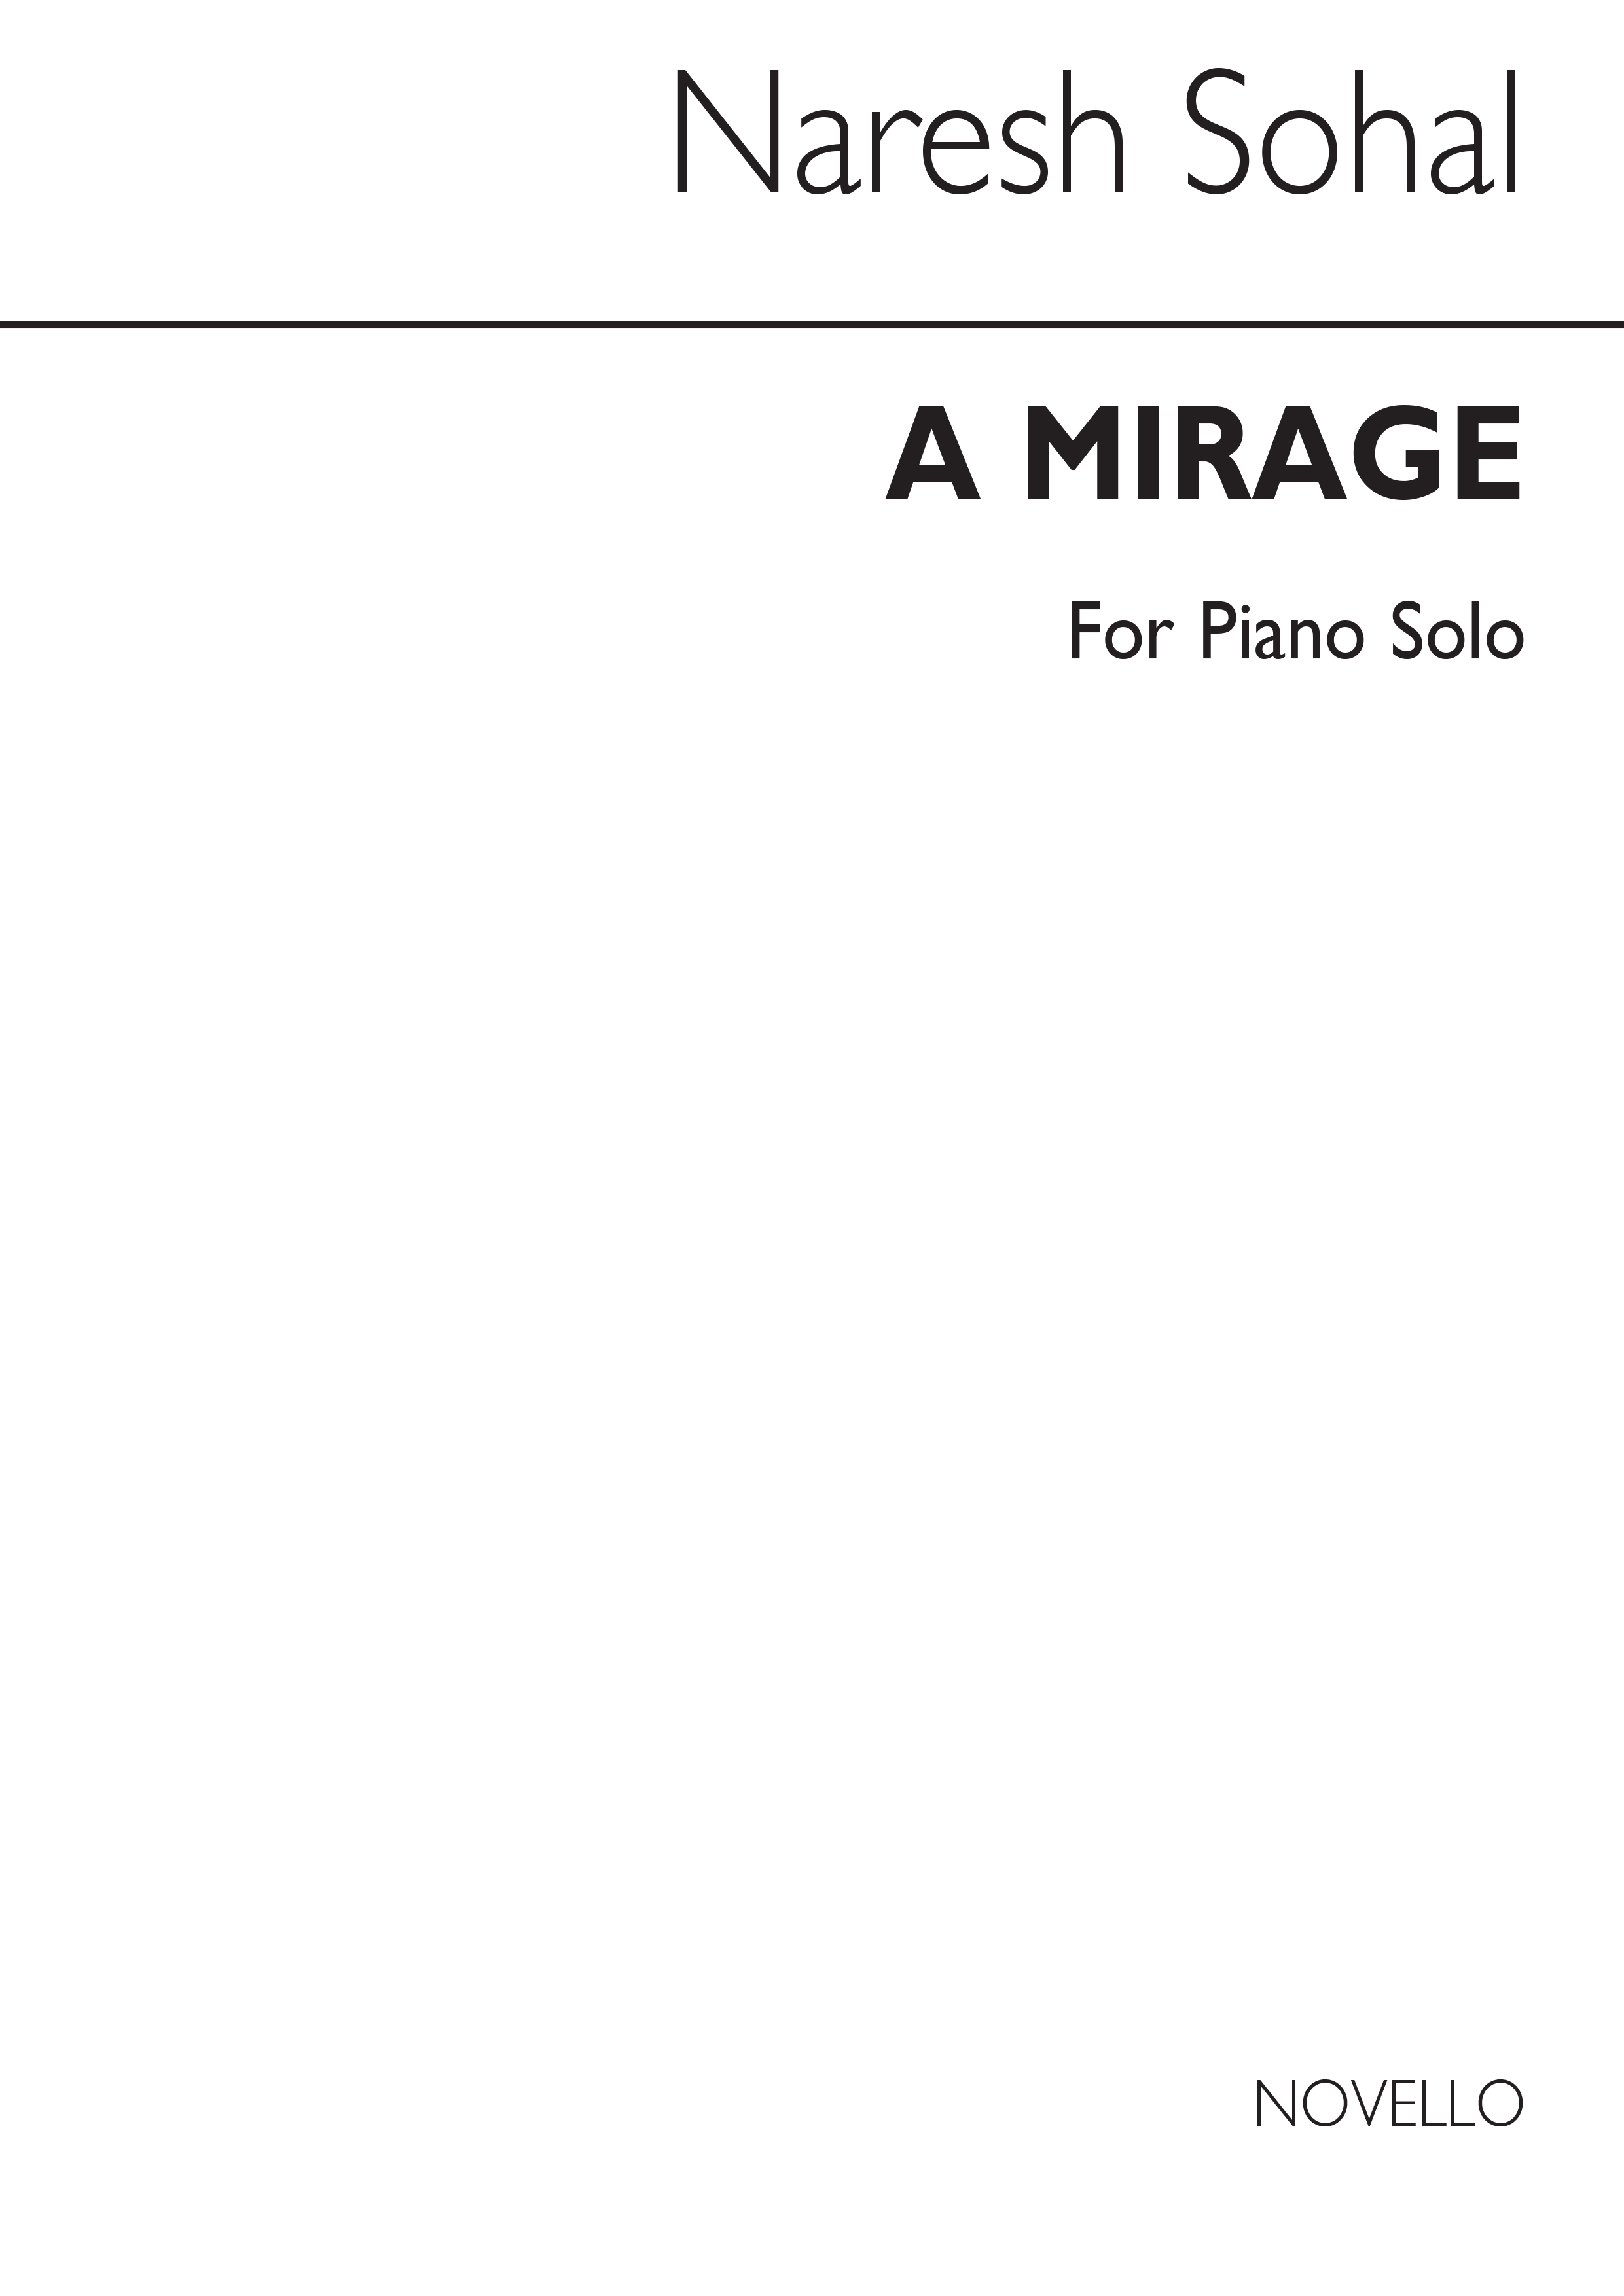 Sohal: Mirage for Piano